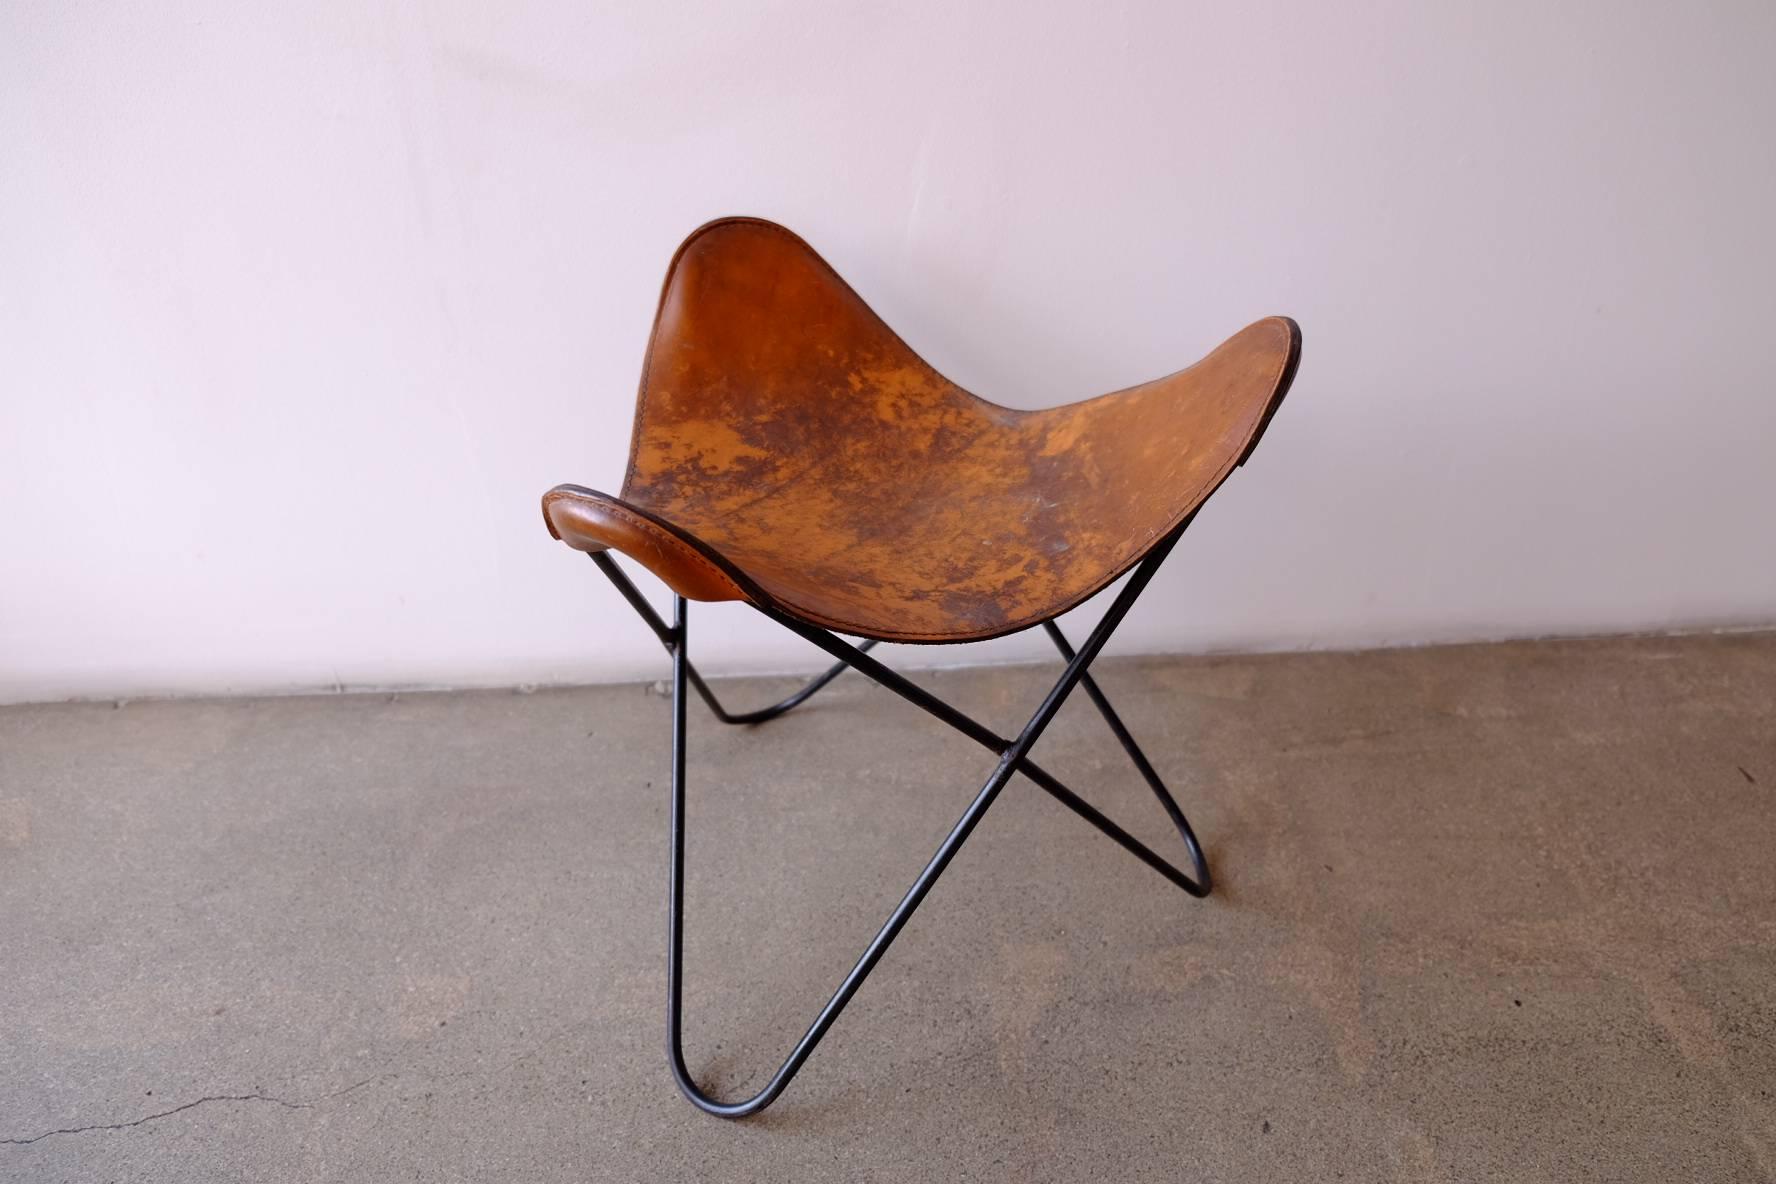 Mid-20th Century Rare Butterfly Stool by Jorge Ferrari-Hardoy for Knoll